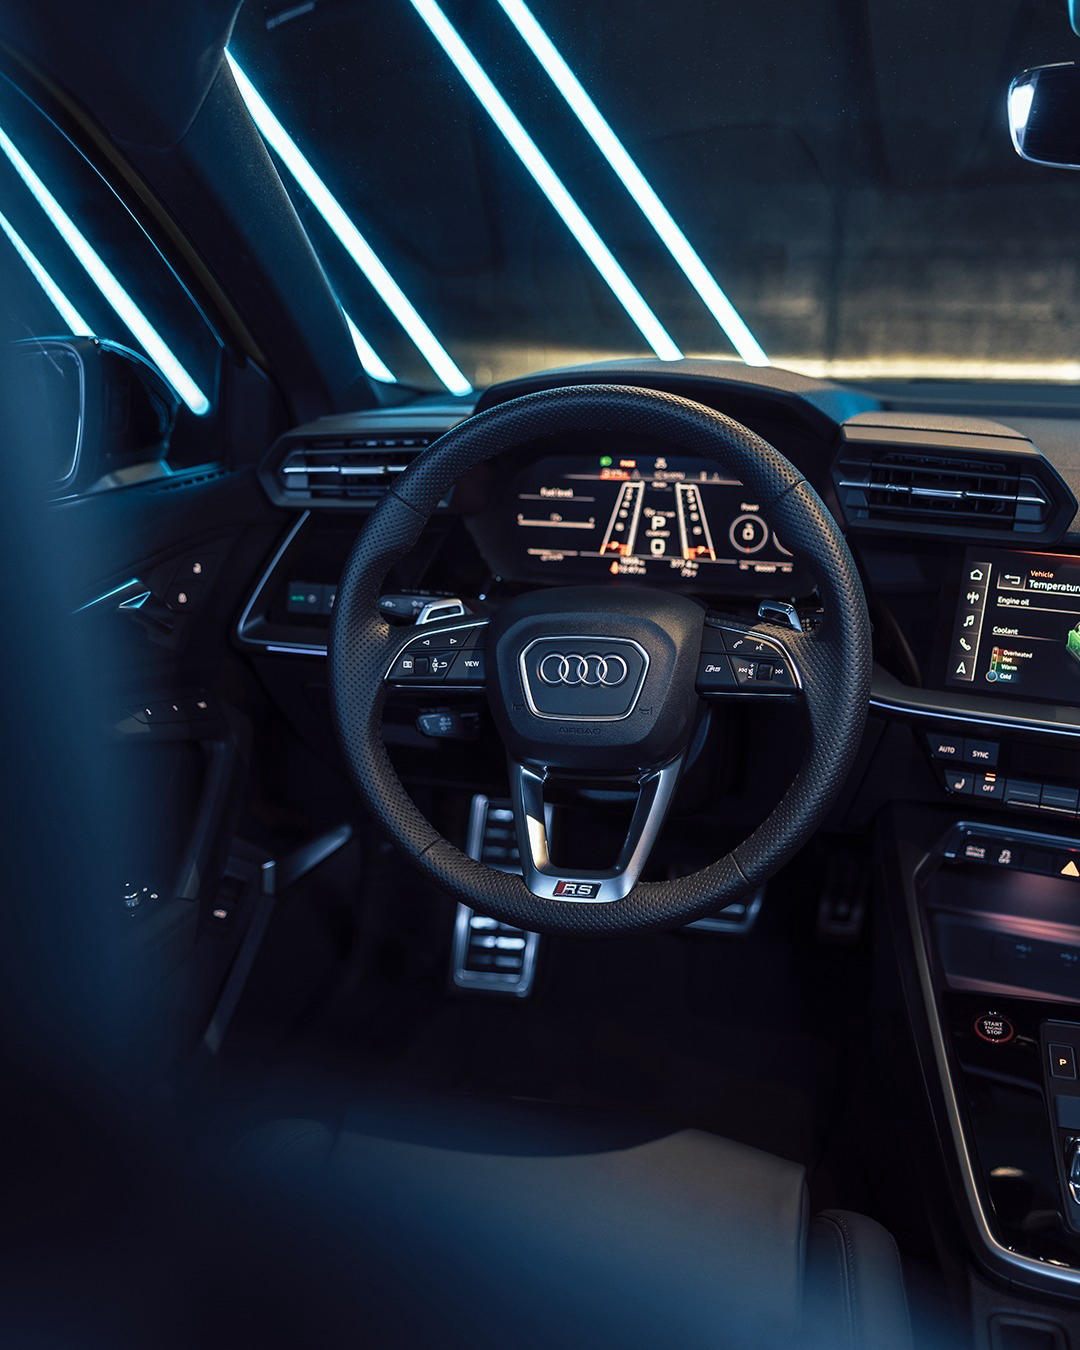 image  1 Audi USA - Correctly hold the steering wheel by placing your hands on 9 and RS 3 o’clock